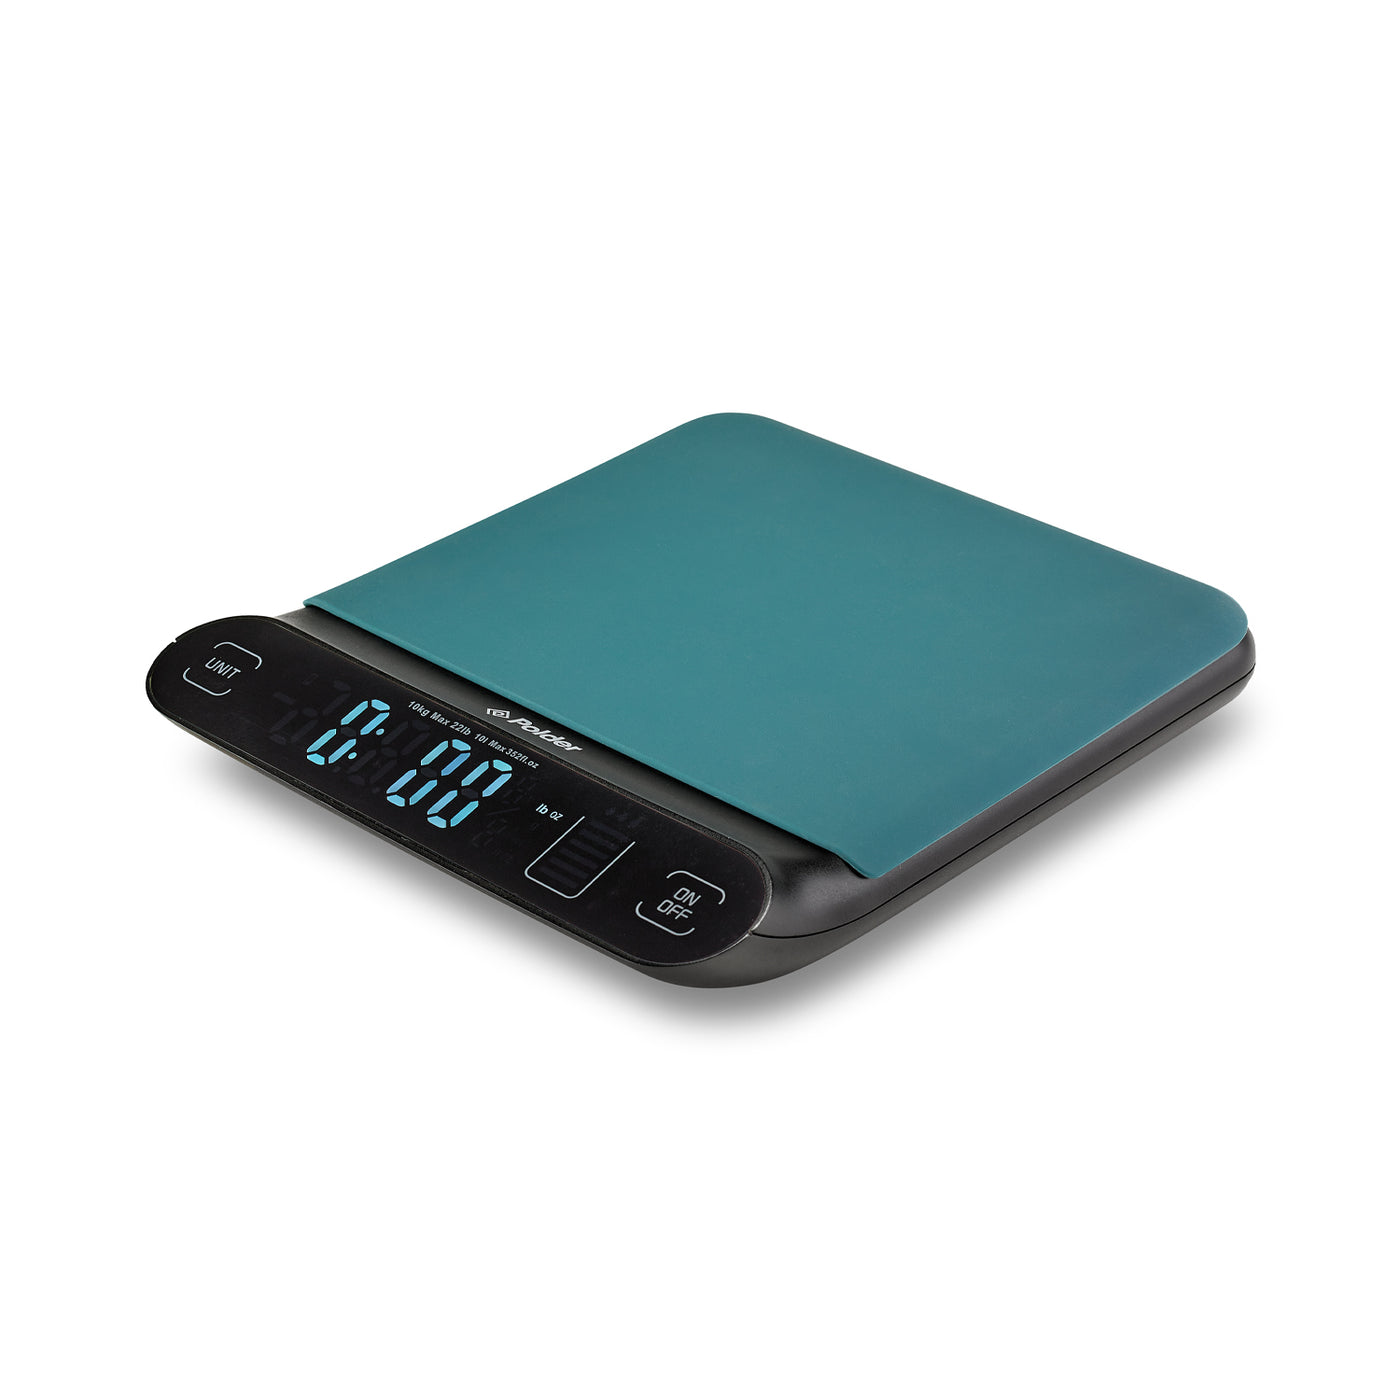 Polder Aqua-Dry Digital Kitchen Scale, Measure Both Liquid and Dry Increments, Removeable Silicone Mat, Easy to Clean, Large Numerals for Easy